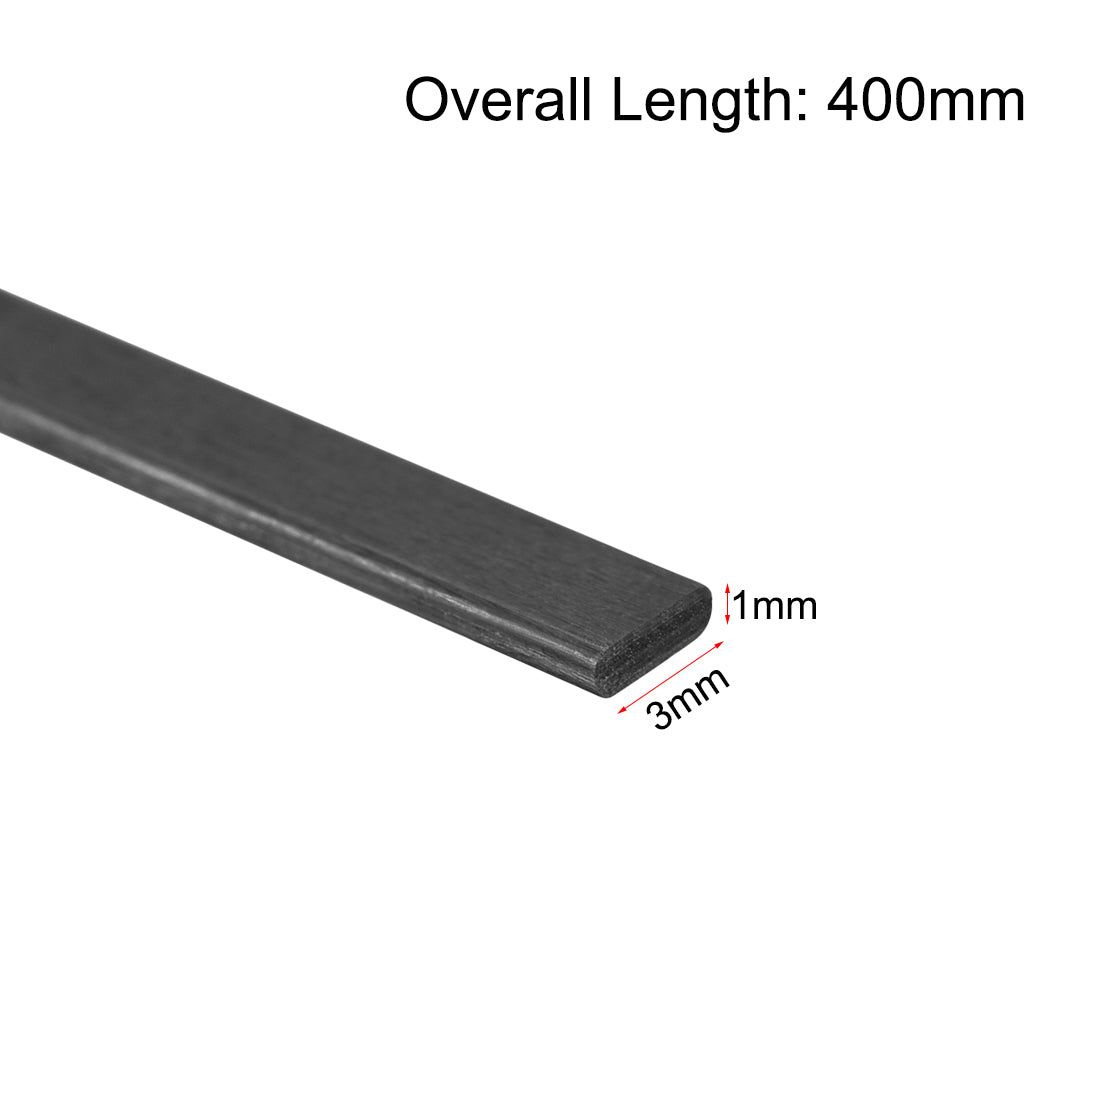 uxcell Uxcell Carbon Fiber Strip Bars 1x3mm 400mm Length Pultruded Carbon Fiber Strips for Kites, RC Airplane 2 Pcs